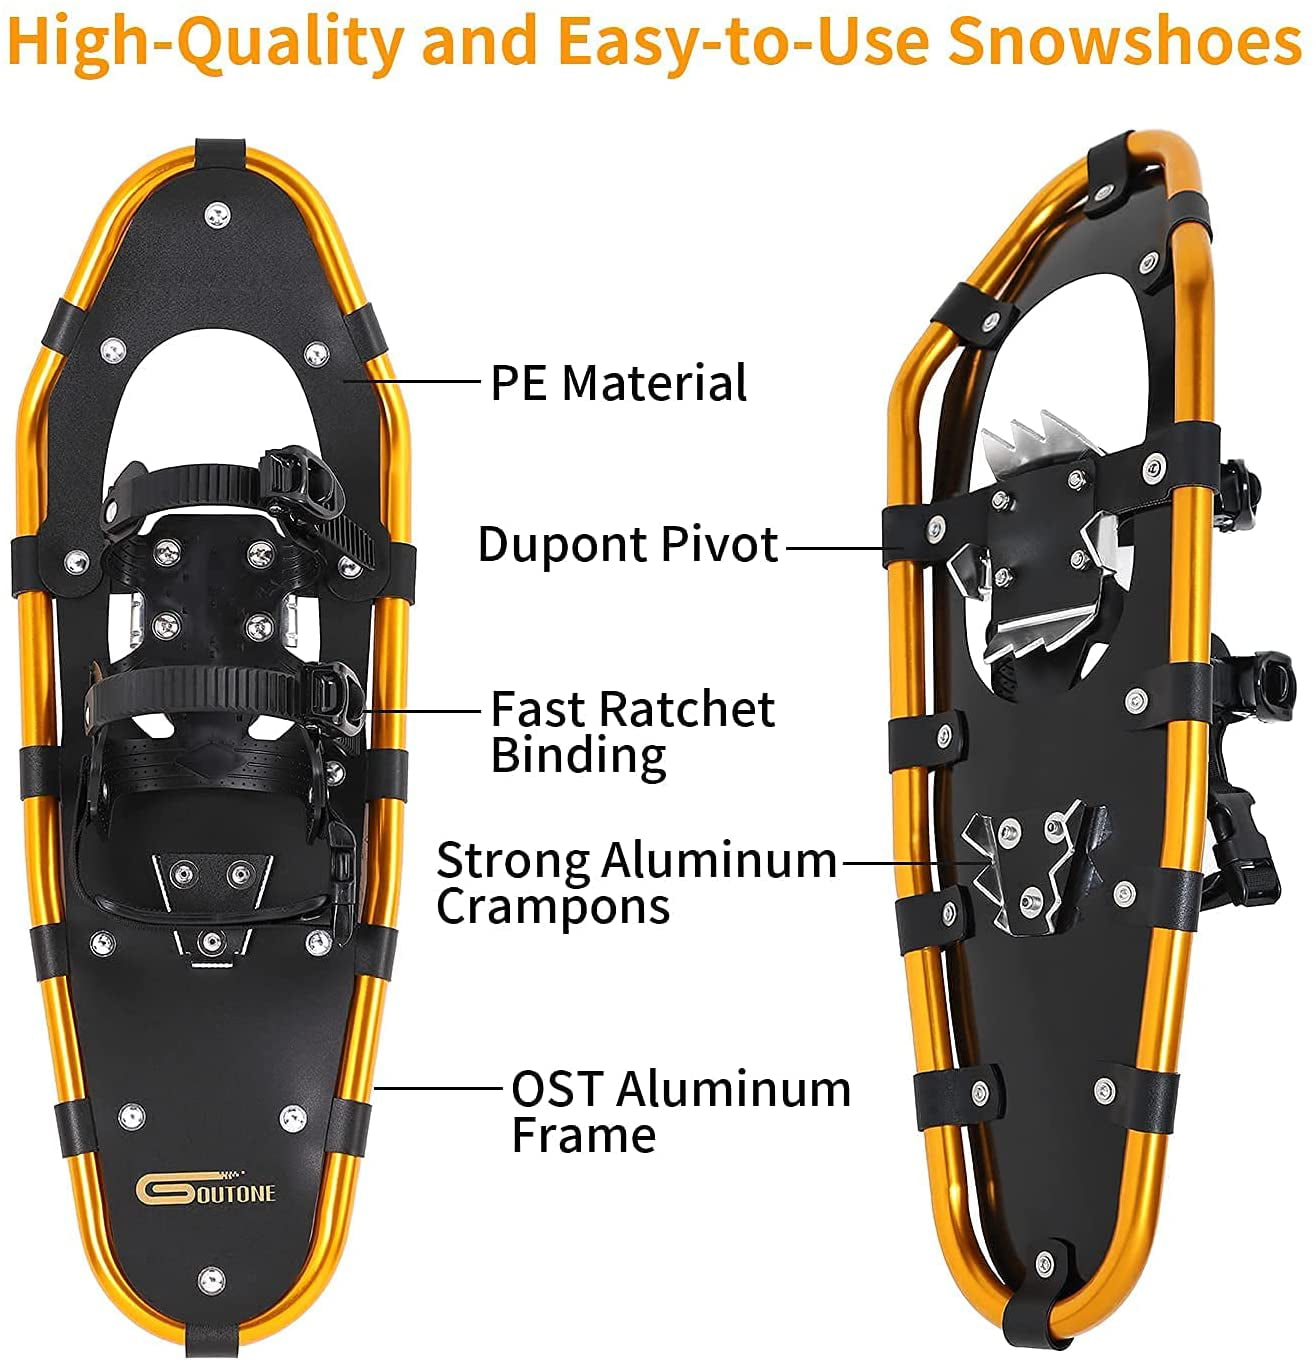 POCREATION 30 Inches Light Weight Snowshoes,Hike Snowshoes Aluminum Frame Snowfield Flexible Walking with Carrying Tote for Women Men Youth Kids,30x9inch 